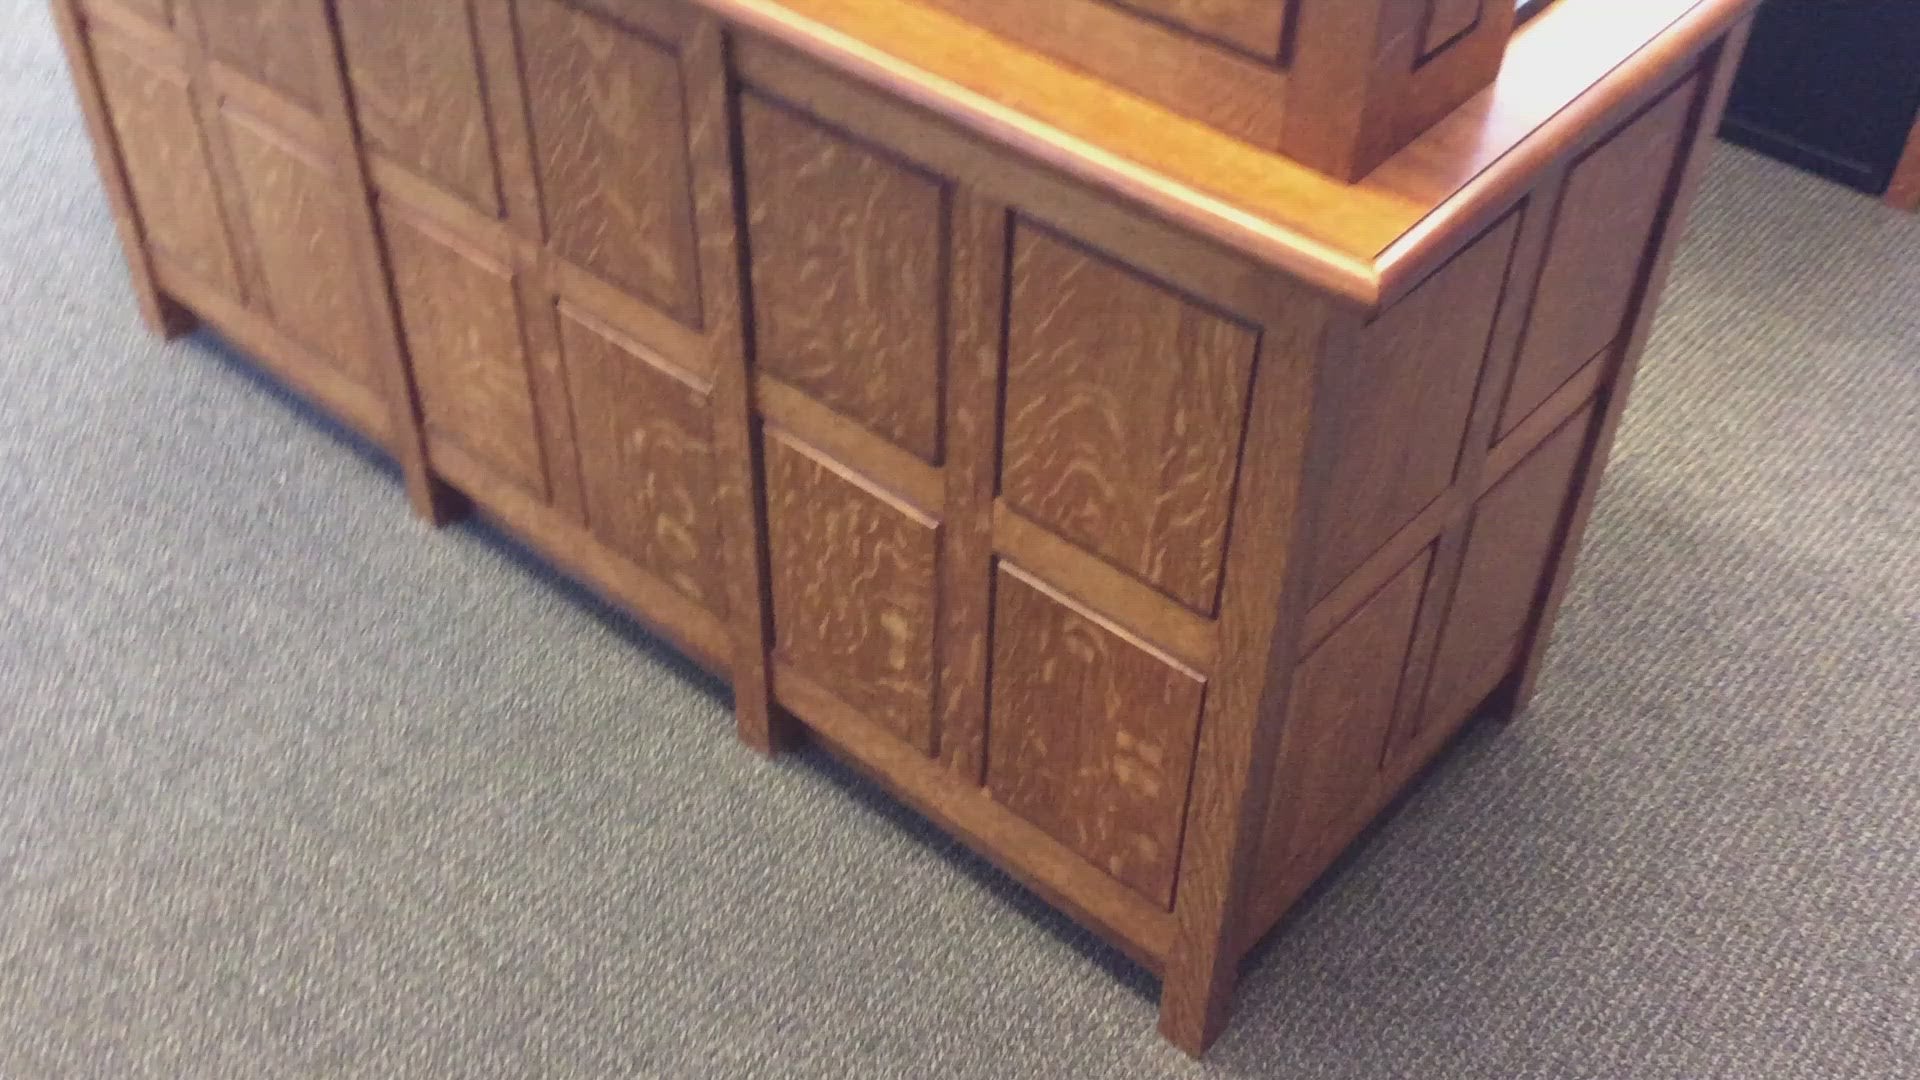 A short video "walk-around" of the Merrill Desk some years after it was delivered. It stillt looks great and is loved by the librarians for its functionality.